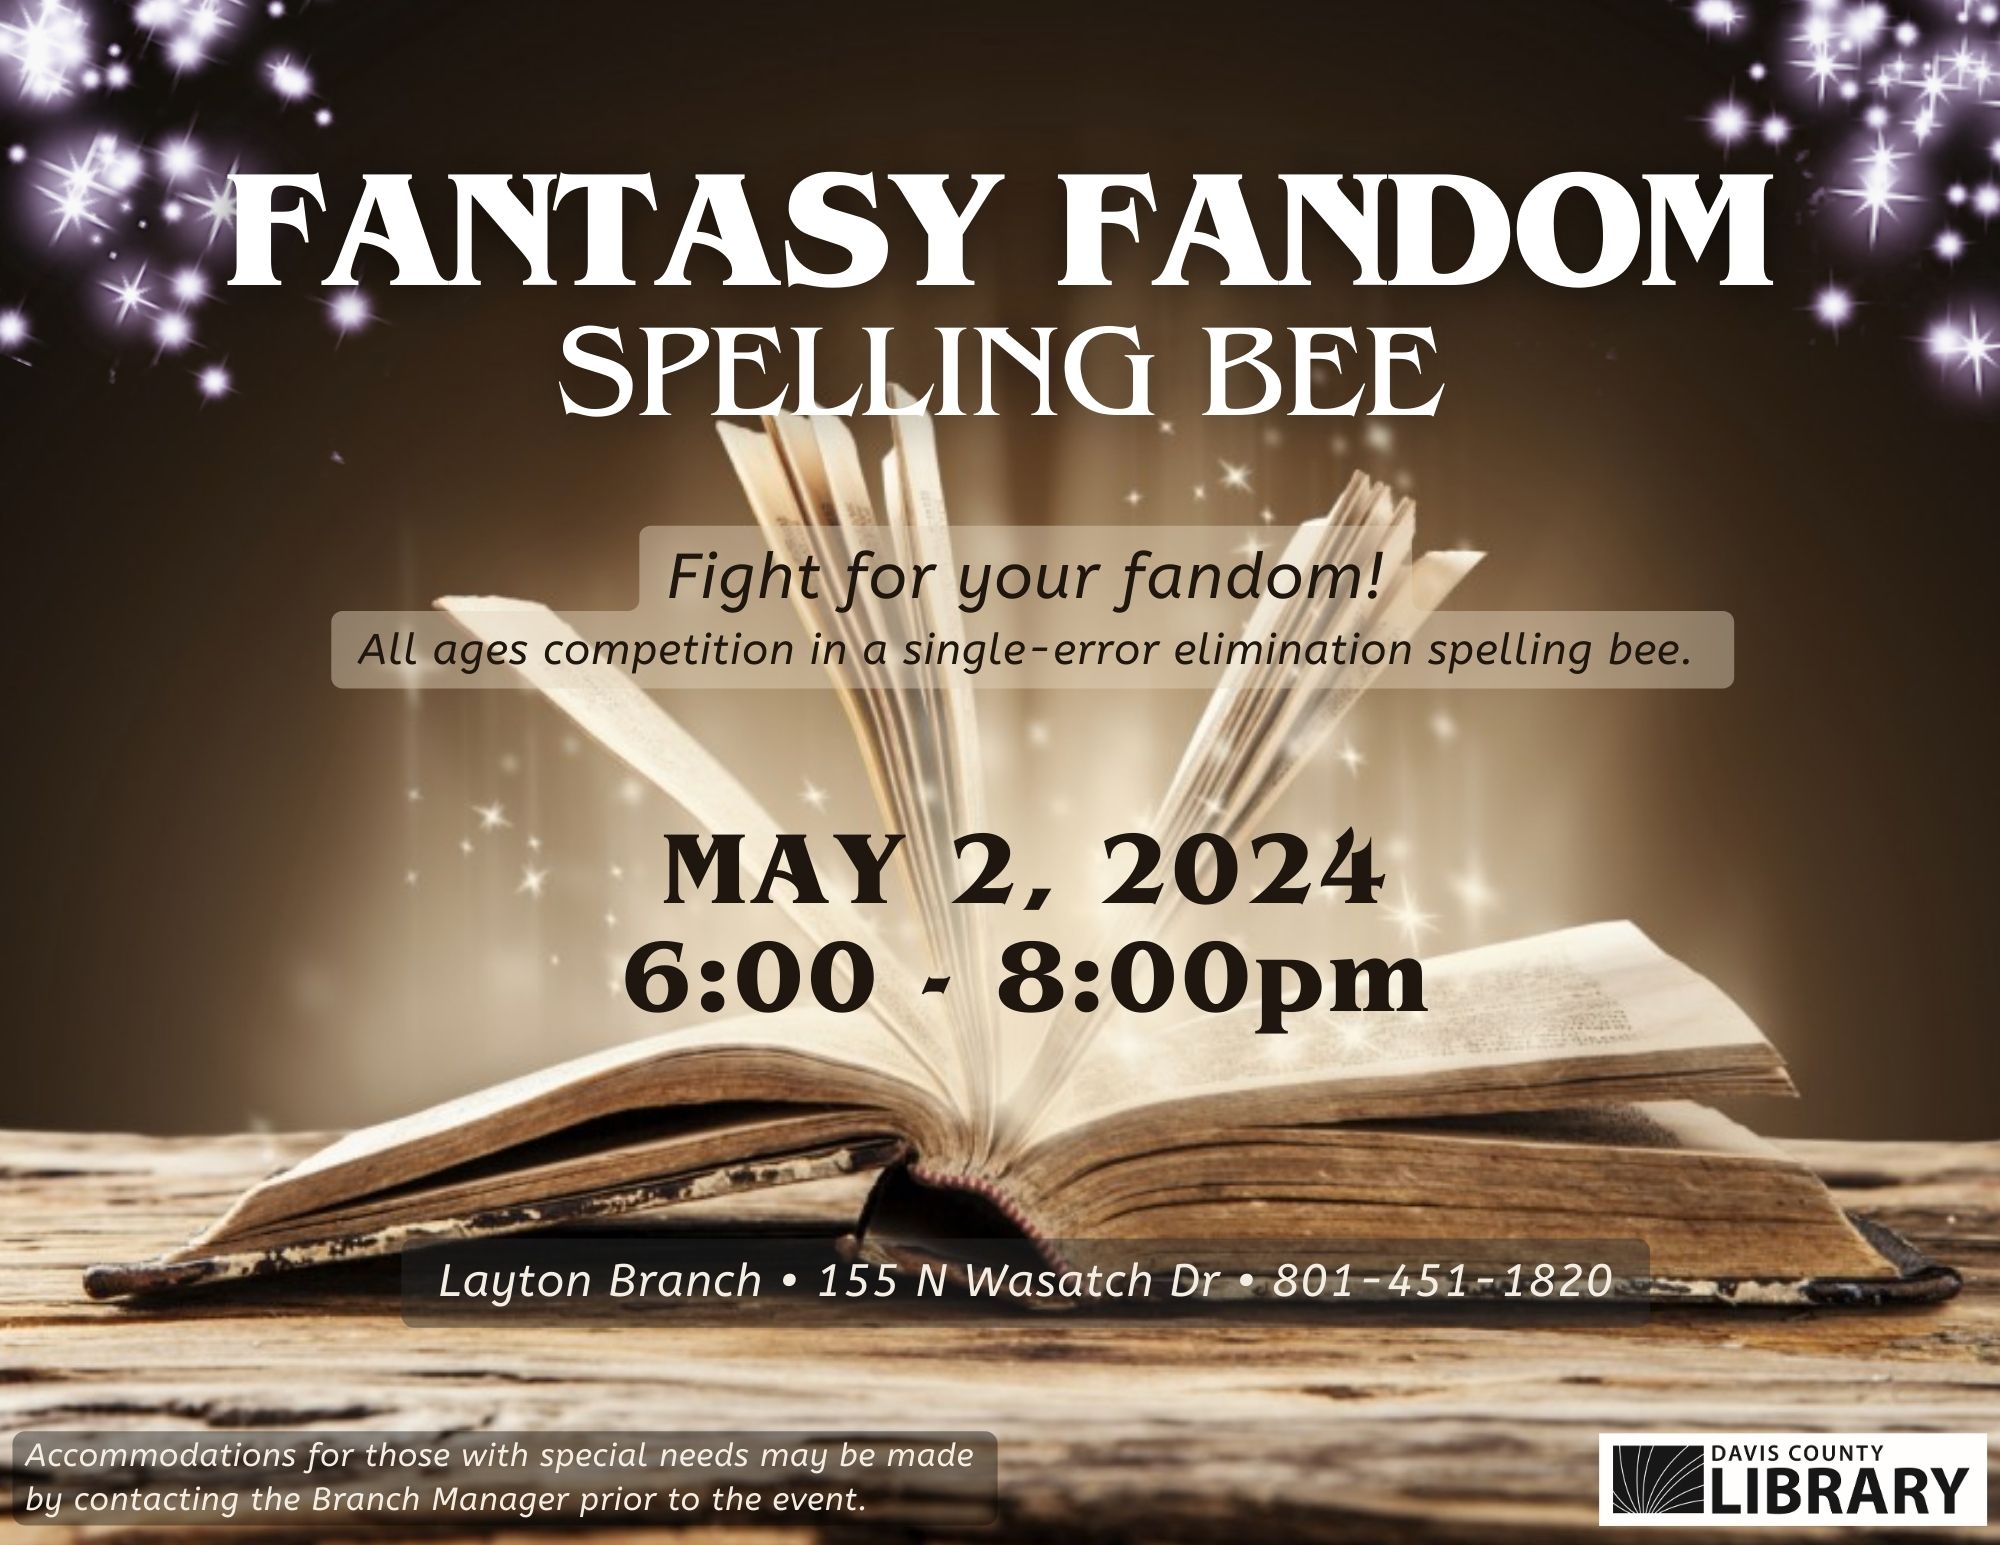 Fantasy Fandom Spelling Bee on May 2nd, 2024 at 6:00pm located at the Layton Branch Library. 